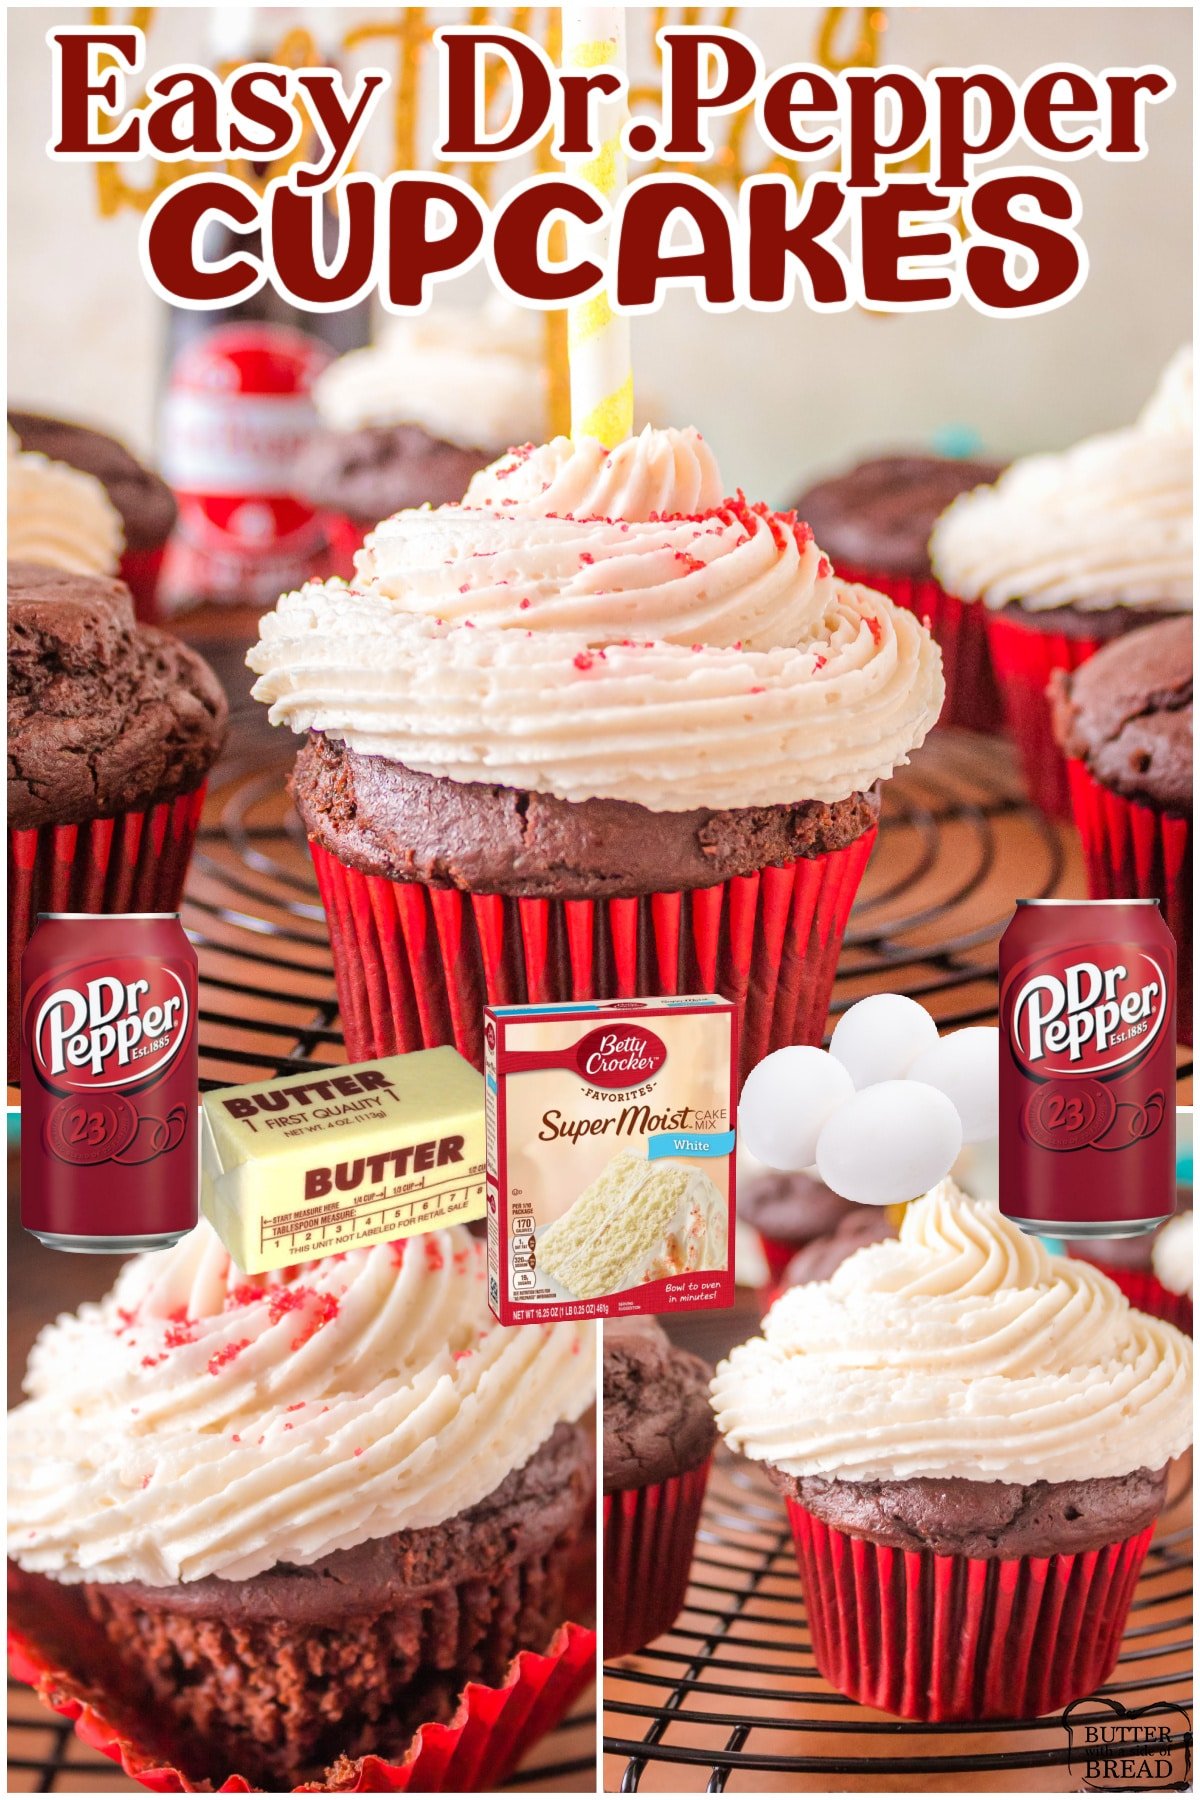 Dr. Pepper Cupcakes are deliciously rich & chocolatey, topped with a homemade Dr.Pepper buttercream frosting! These soda cupcakes are moist & perfect for Dr. Pepper lovers!